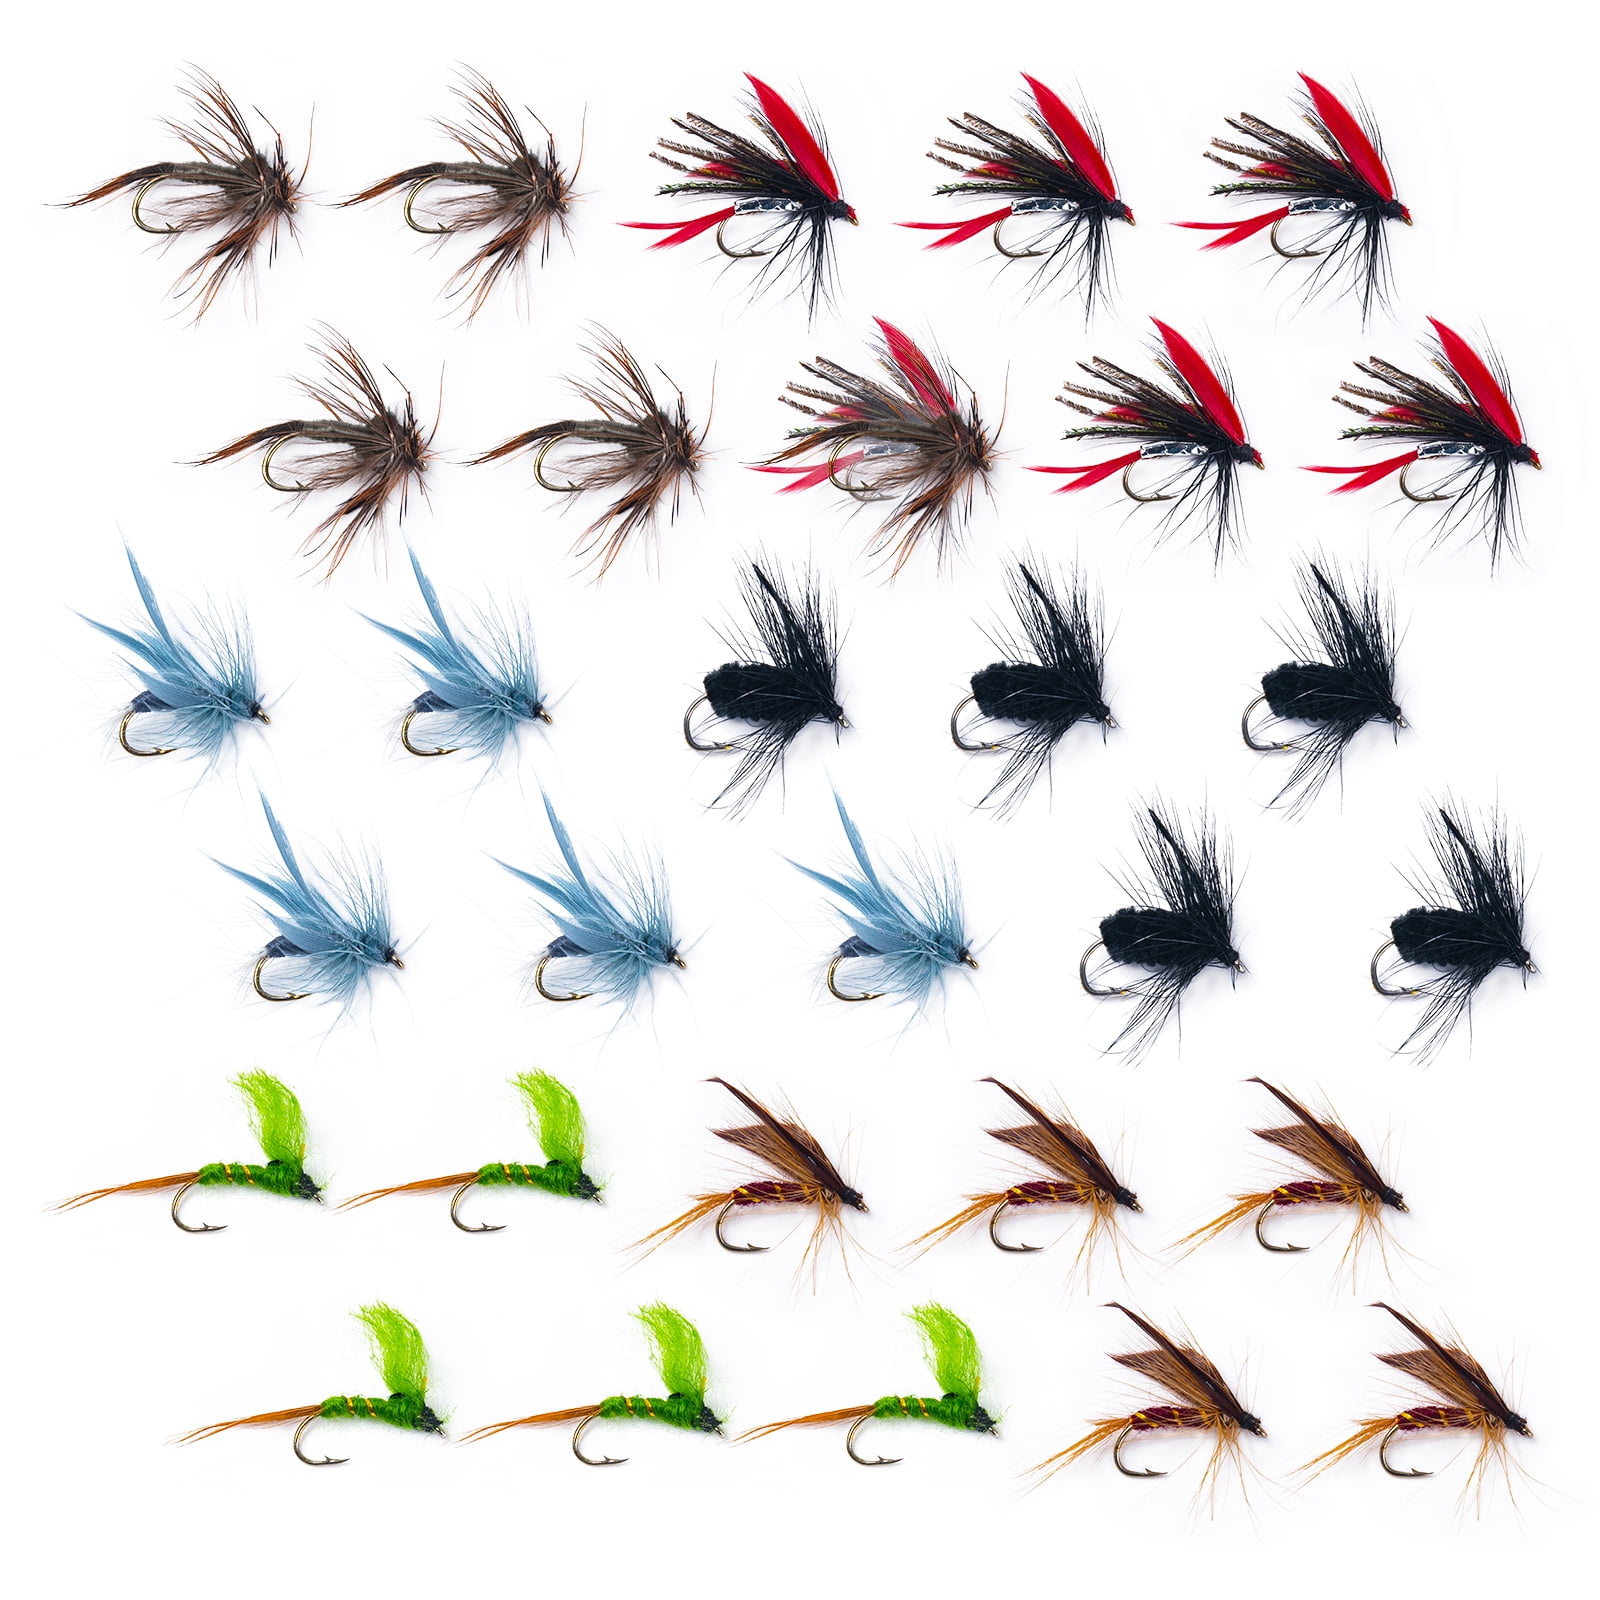 Goture Fly Fishing Flies Kit - 10/30/40/76/100pcs Fly Fishing Lures with Fly  Fishing Box - Fly Fishing Assortment Kit for Bass Trout Salmon Fishing -  Dry Flies Wet Flies Streamers Nymphs 